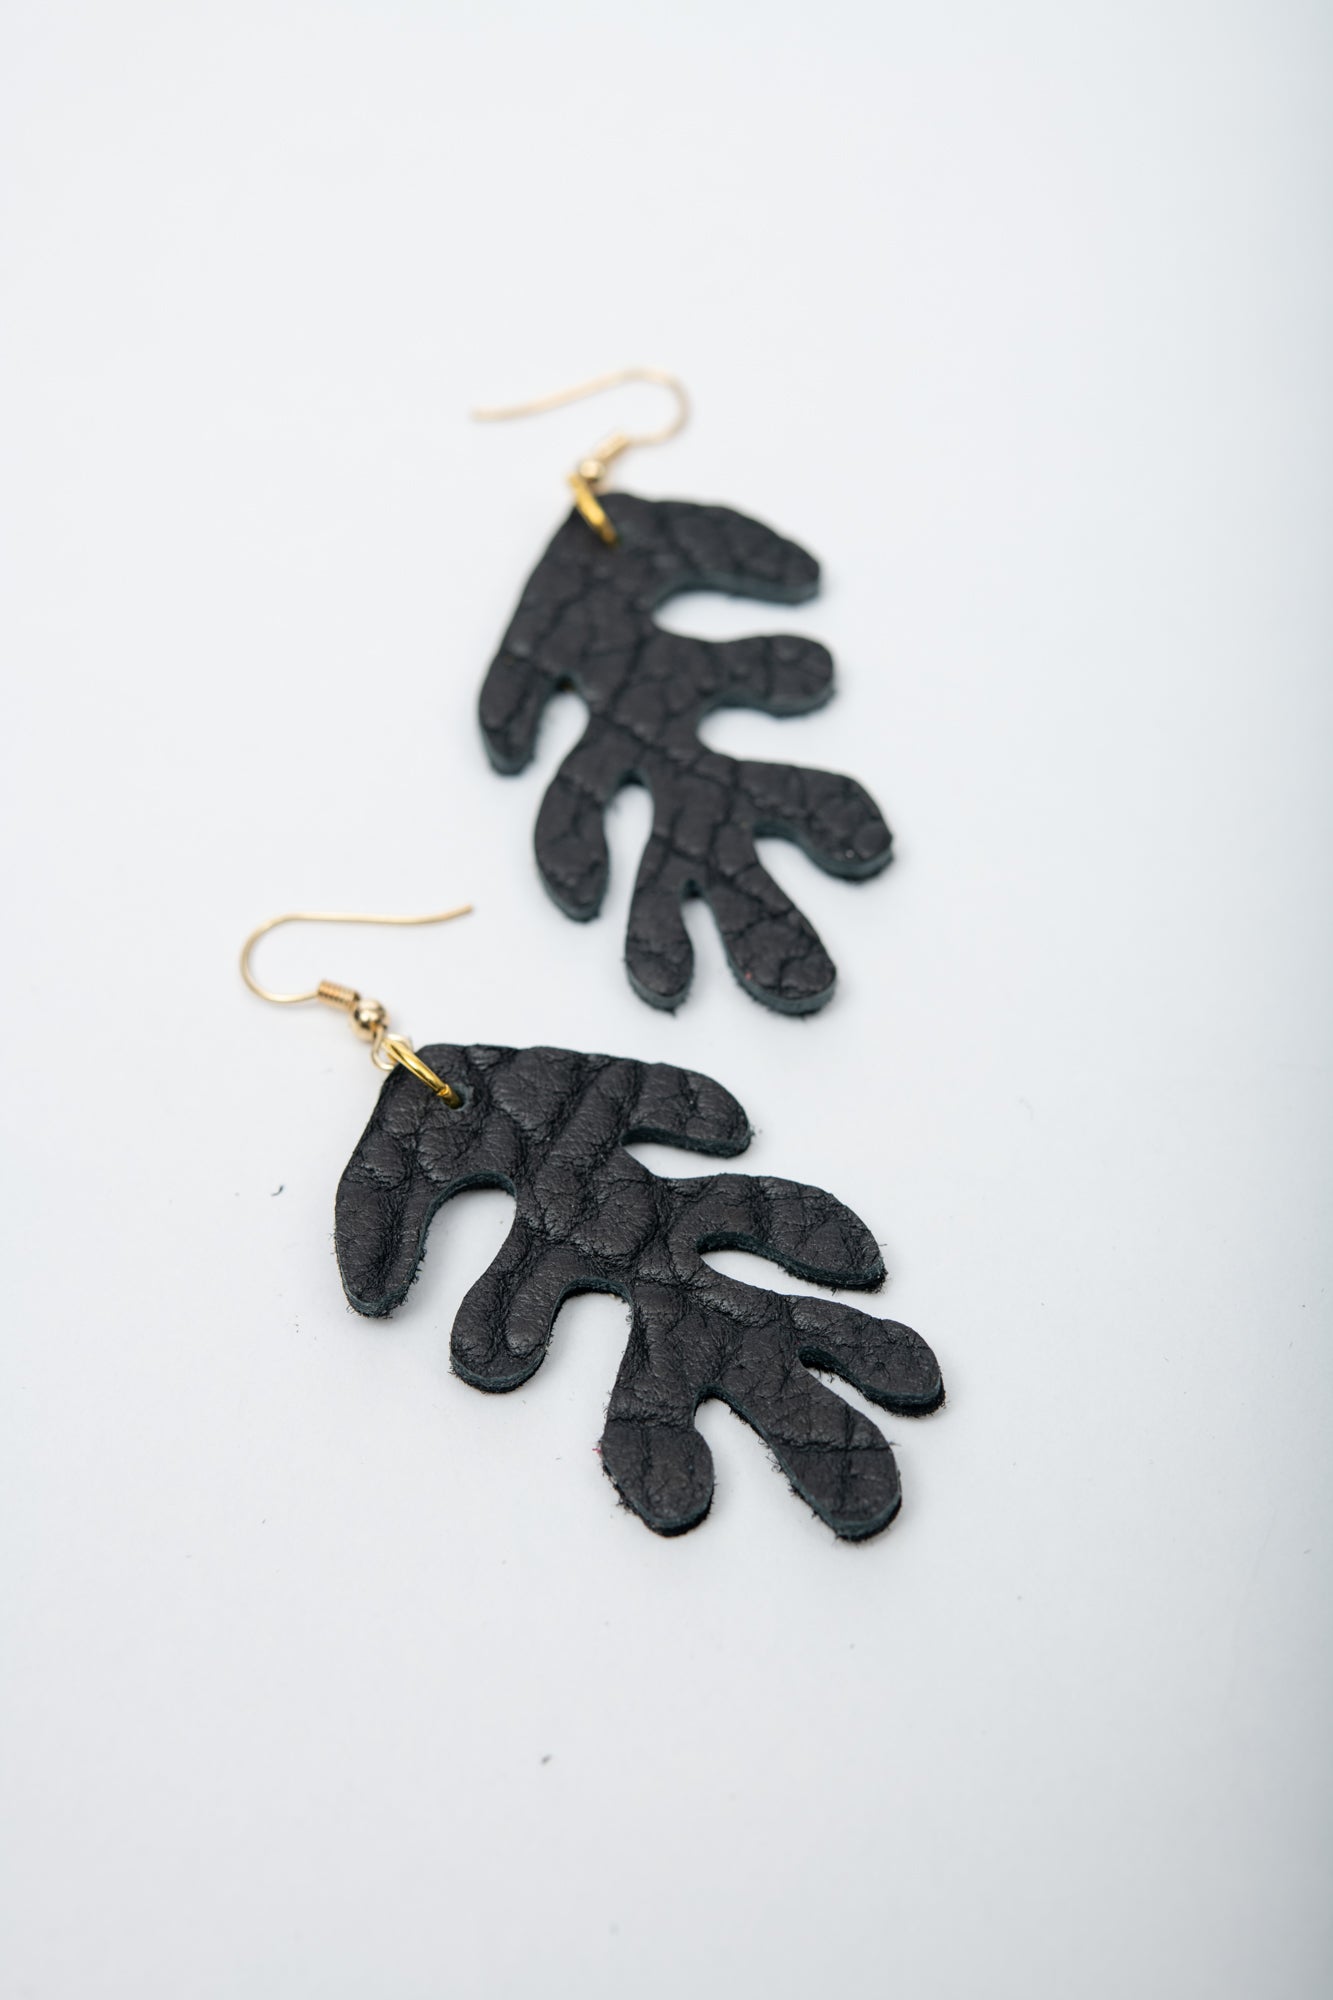 Handmade organic shaped leather earrings CORAIL model by Veinage, Montreal, Canada